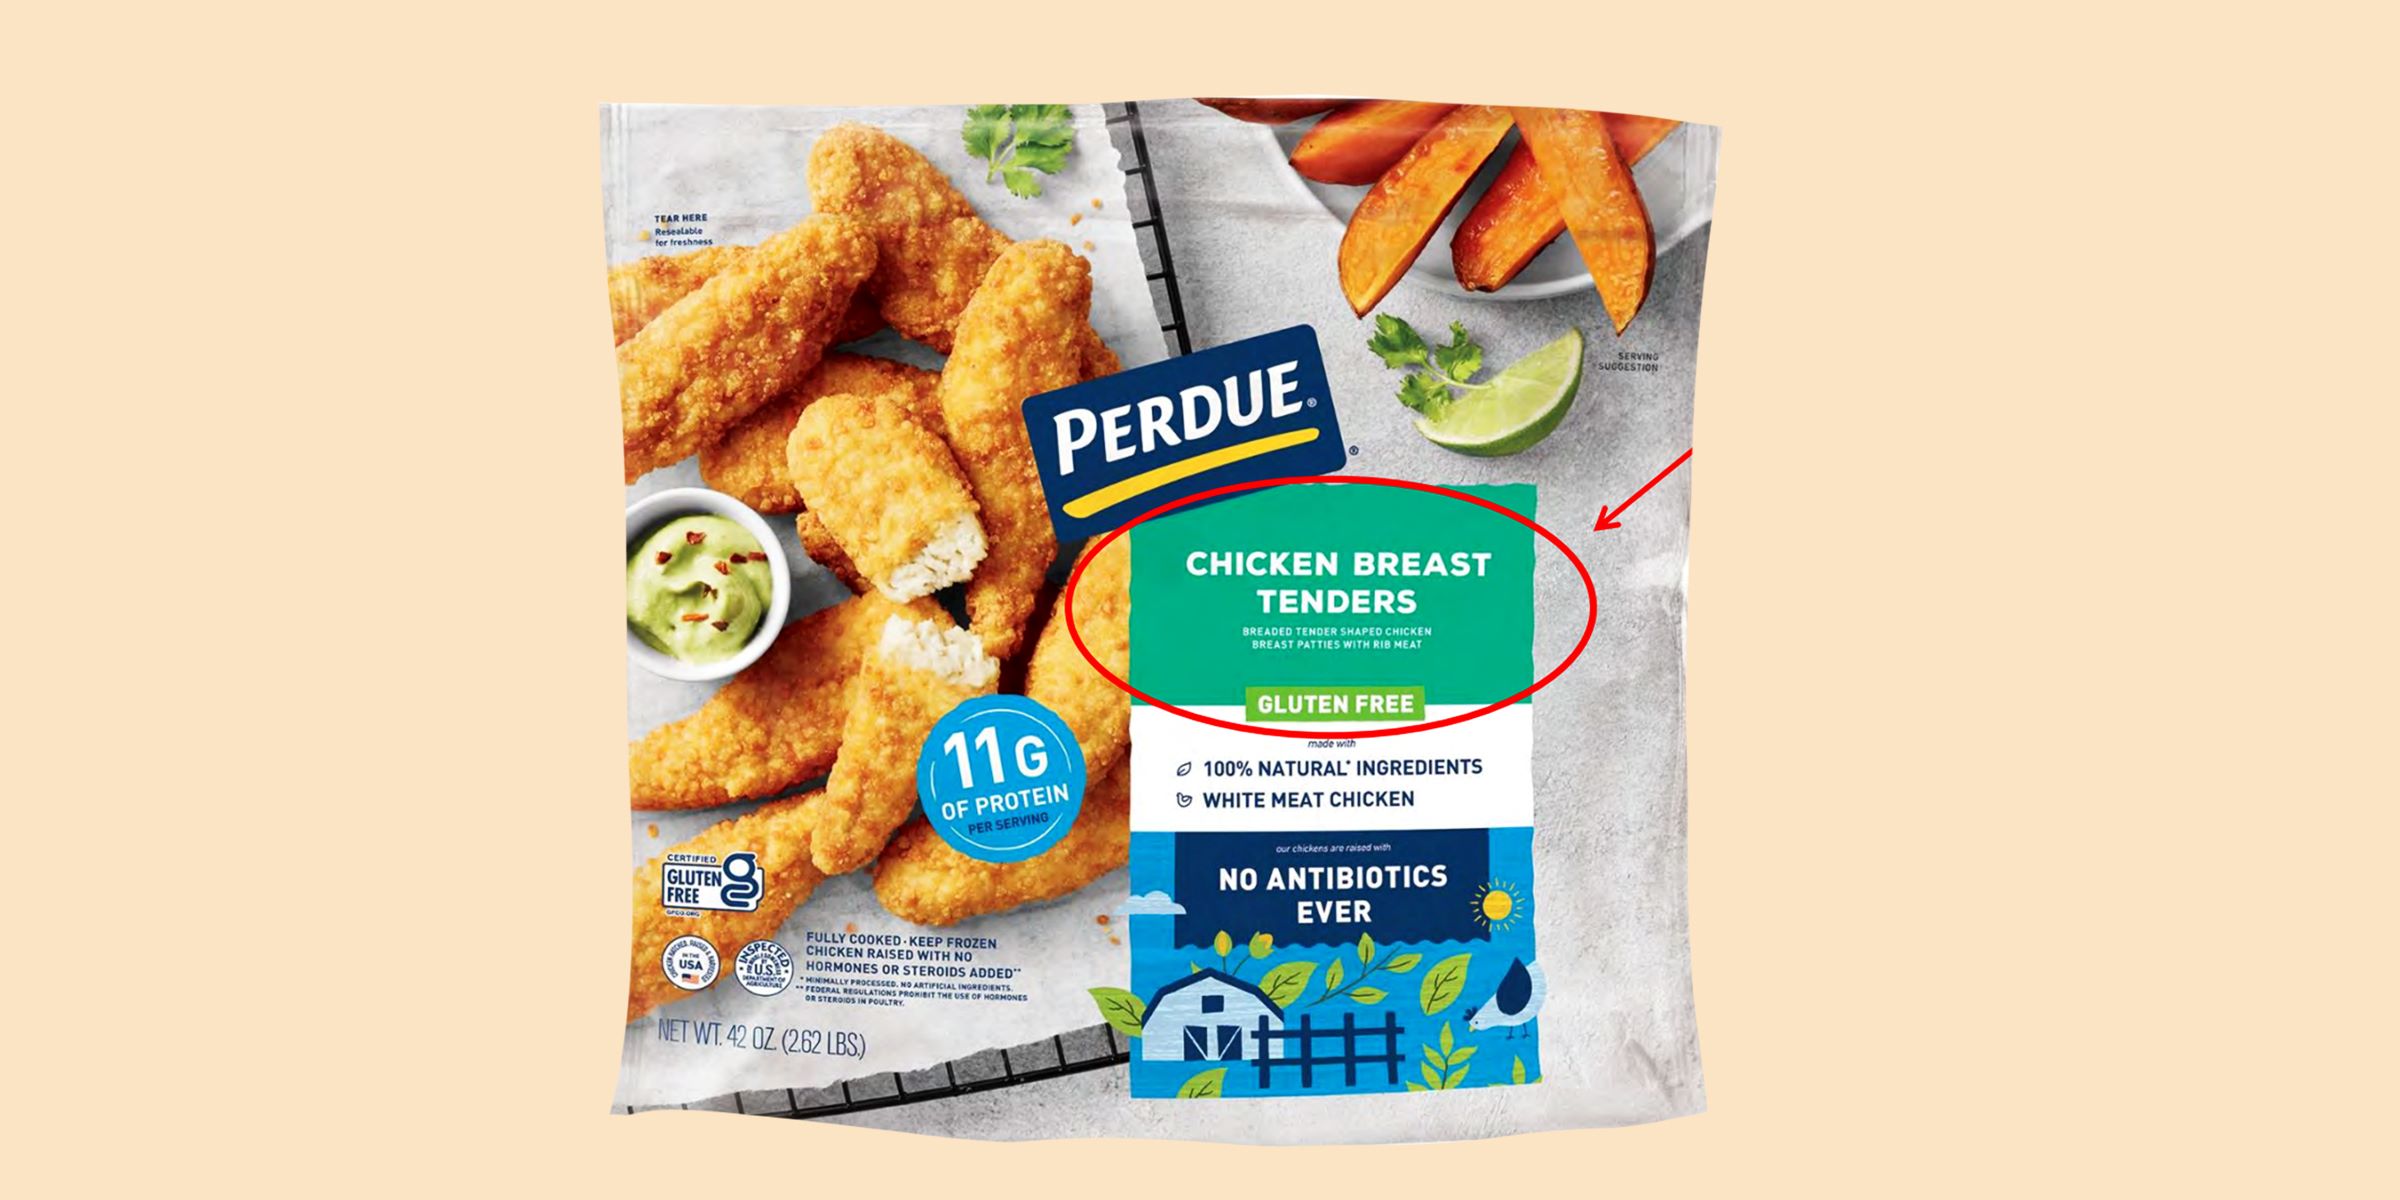 Expired Perdue Cooked Chicken: Should You Be Worried?